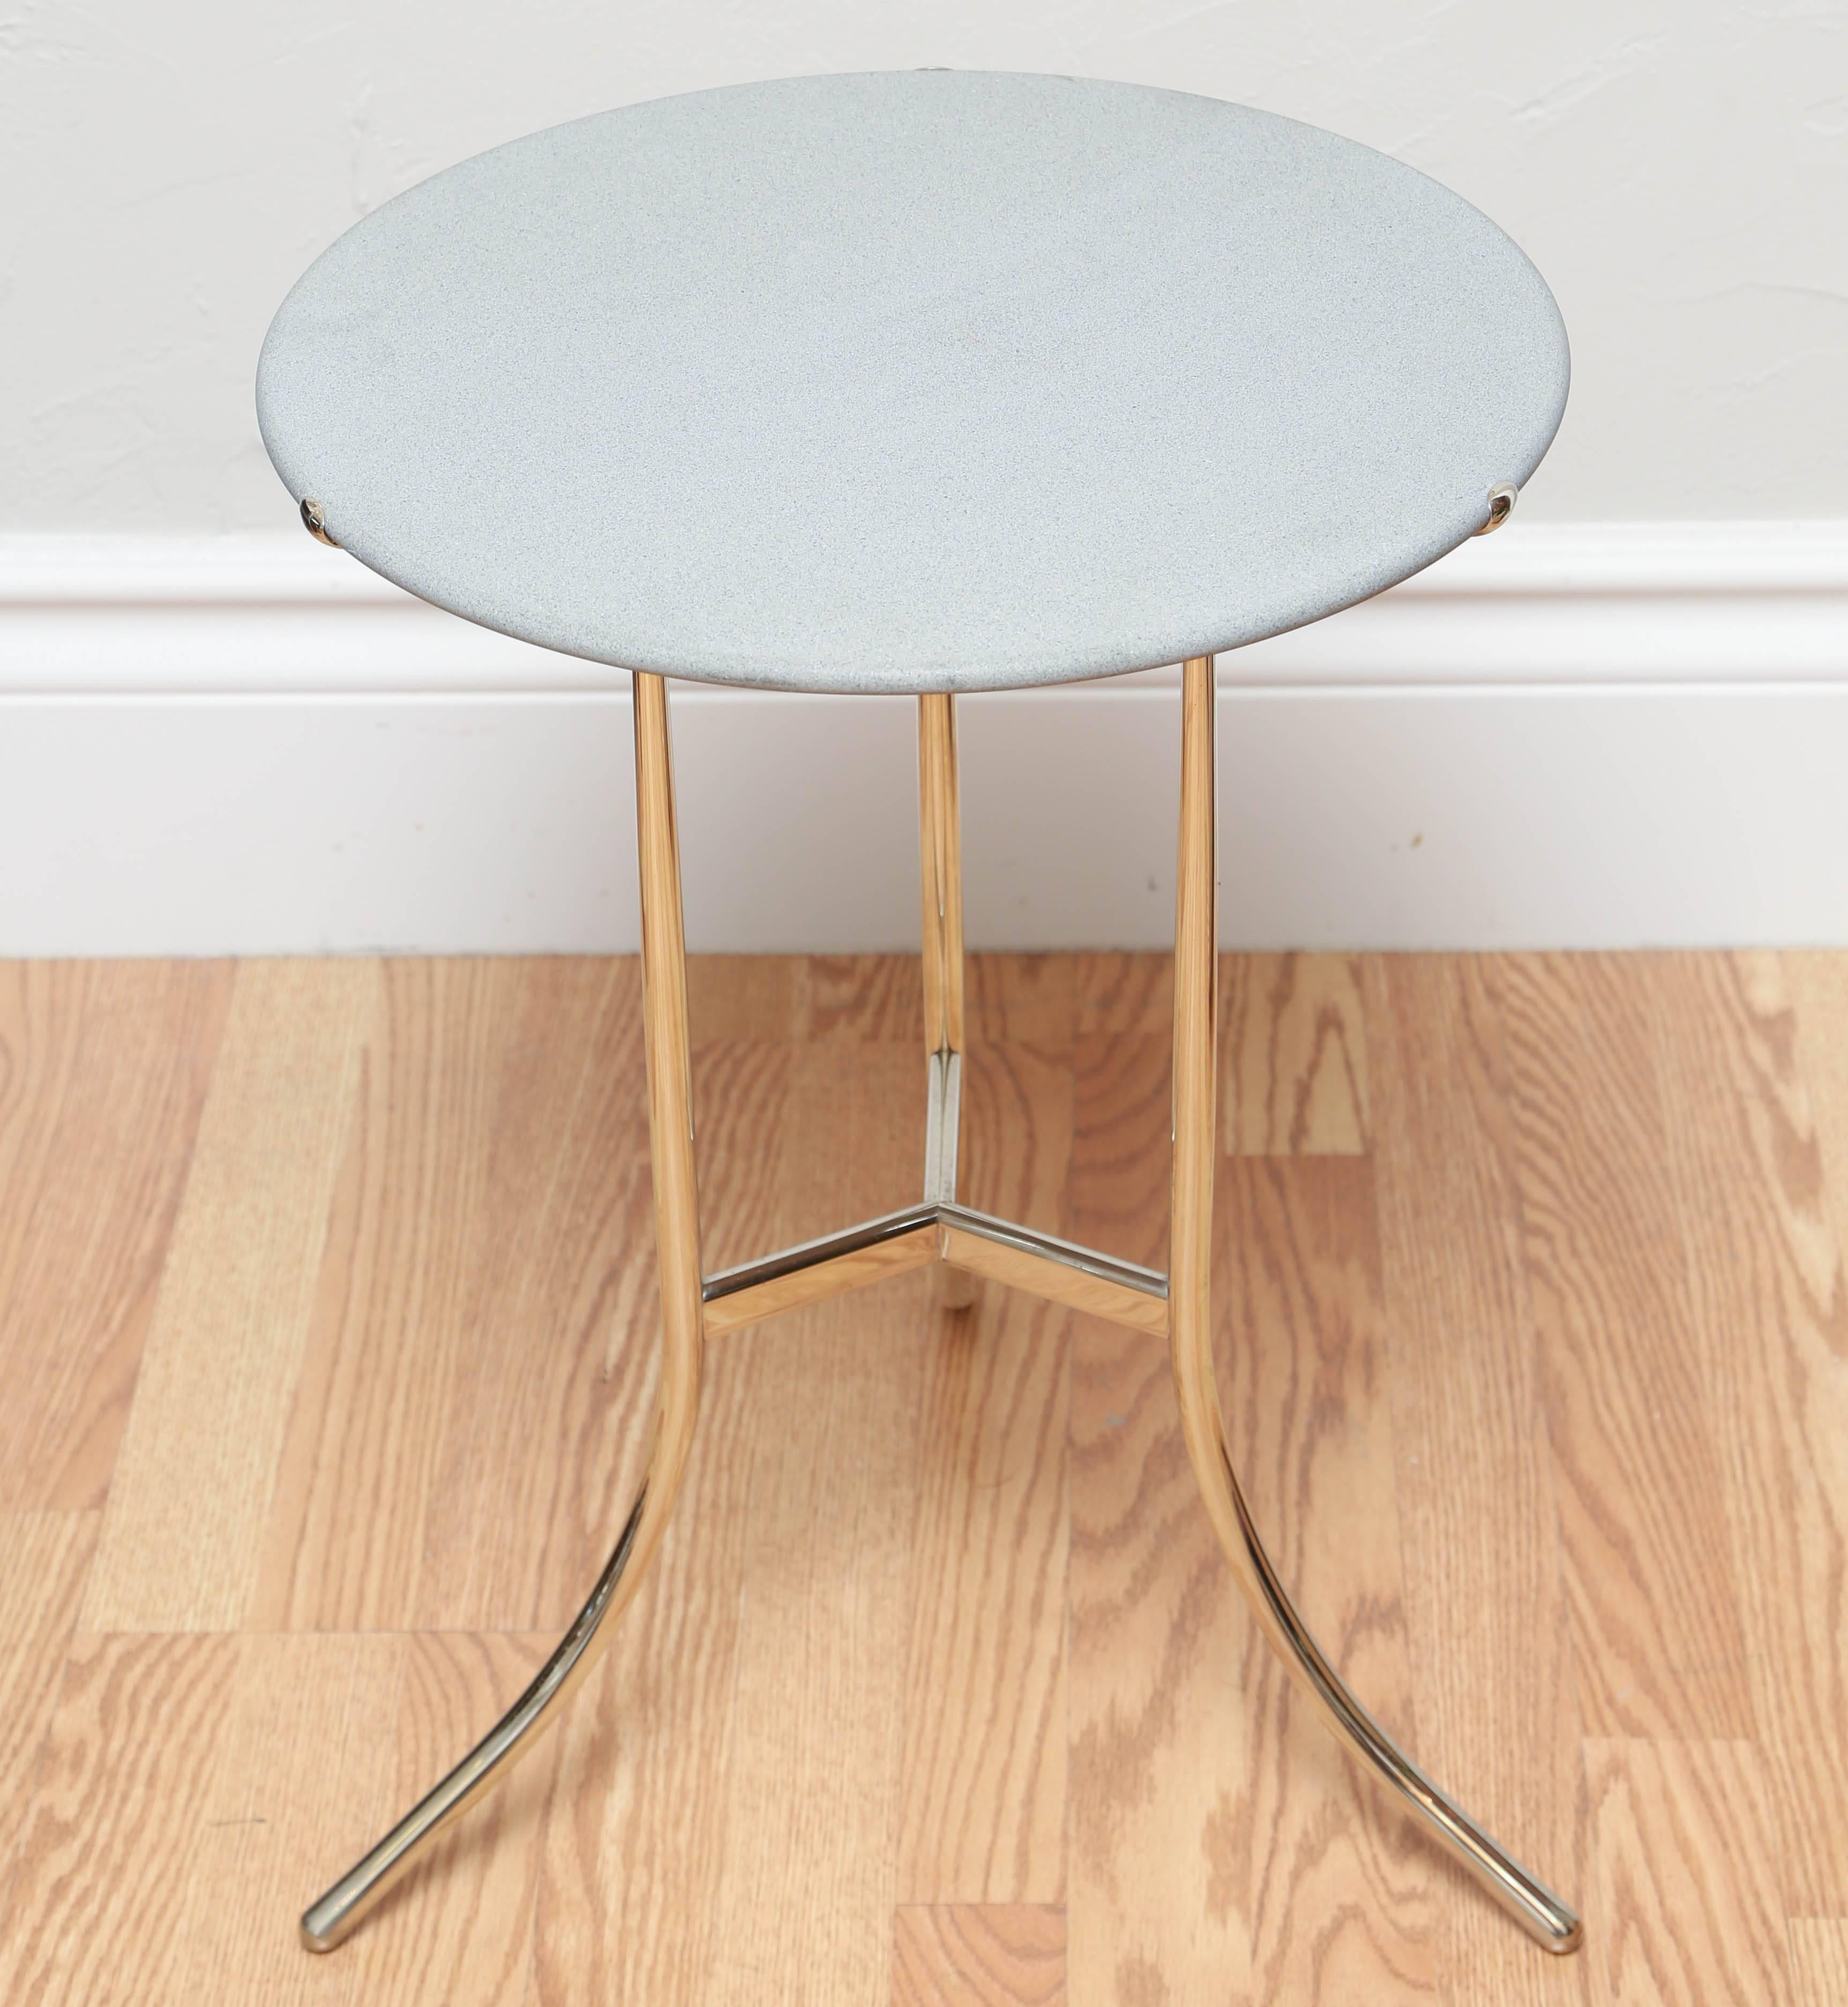 Iconic tripod side table with nickel-plated base and sandstone top. Engraved signature on underside.